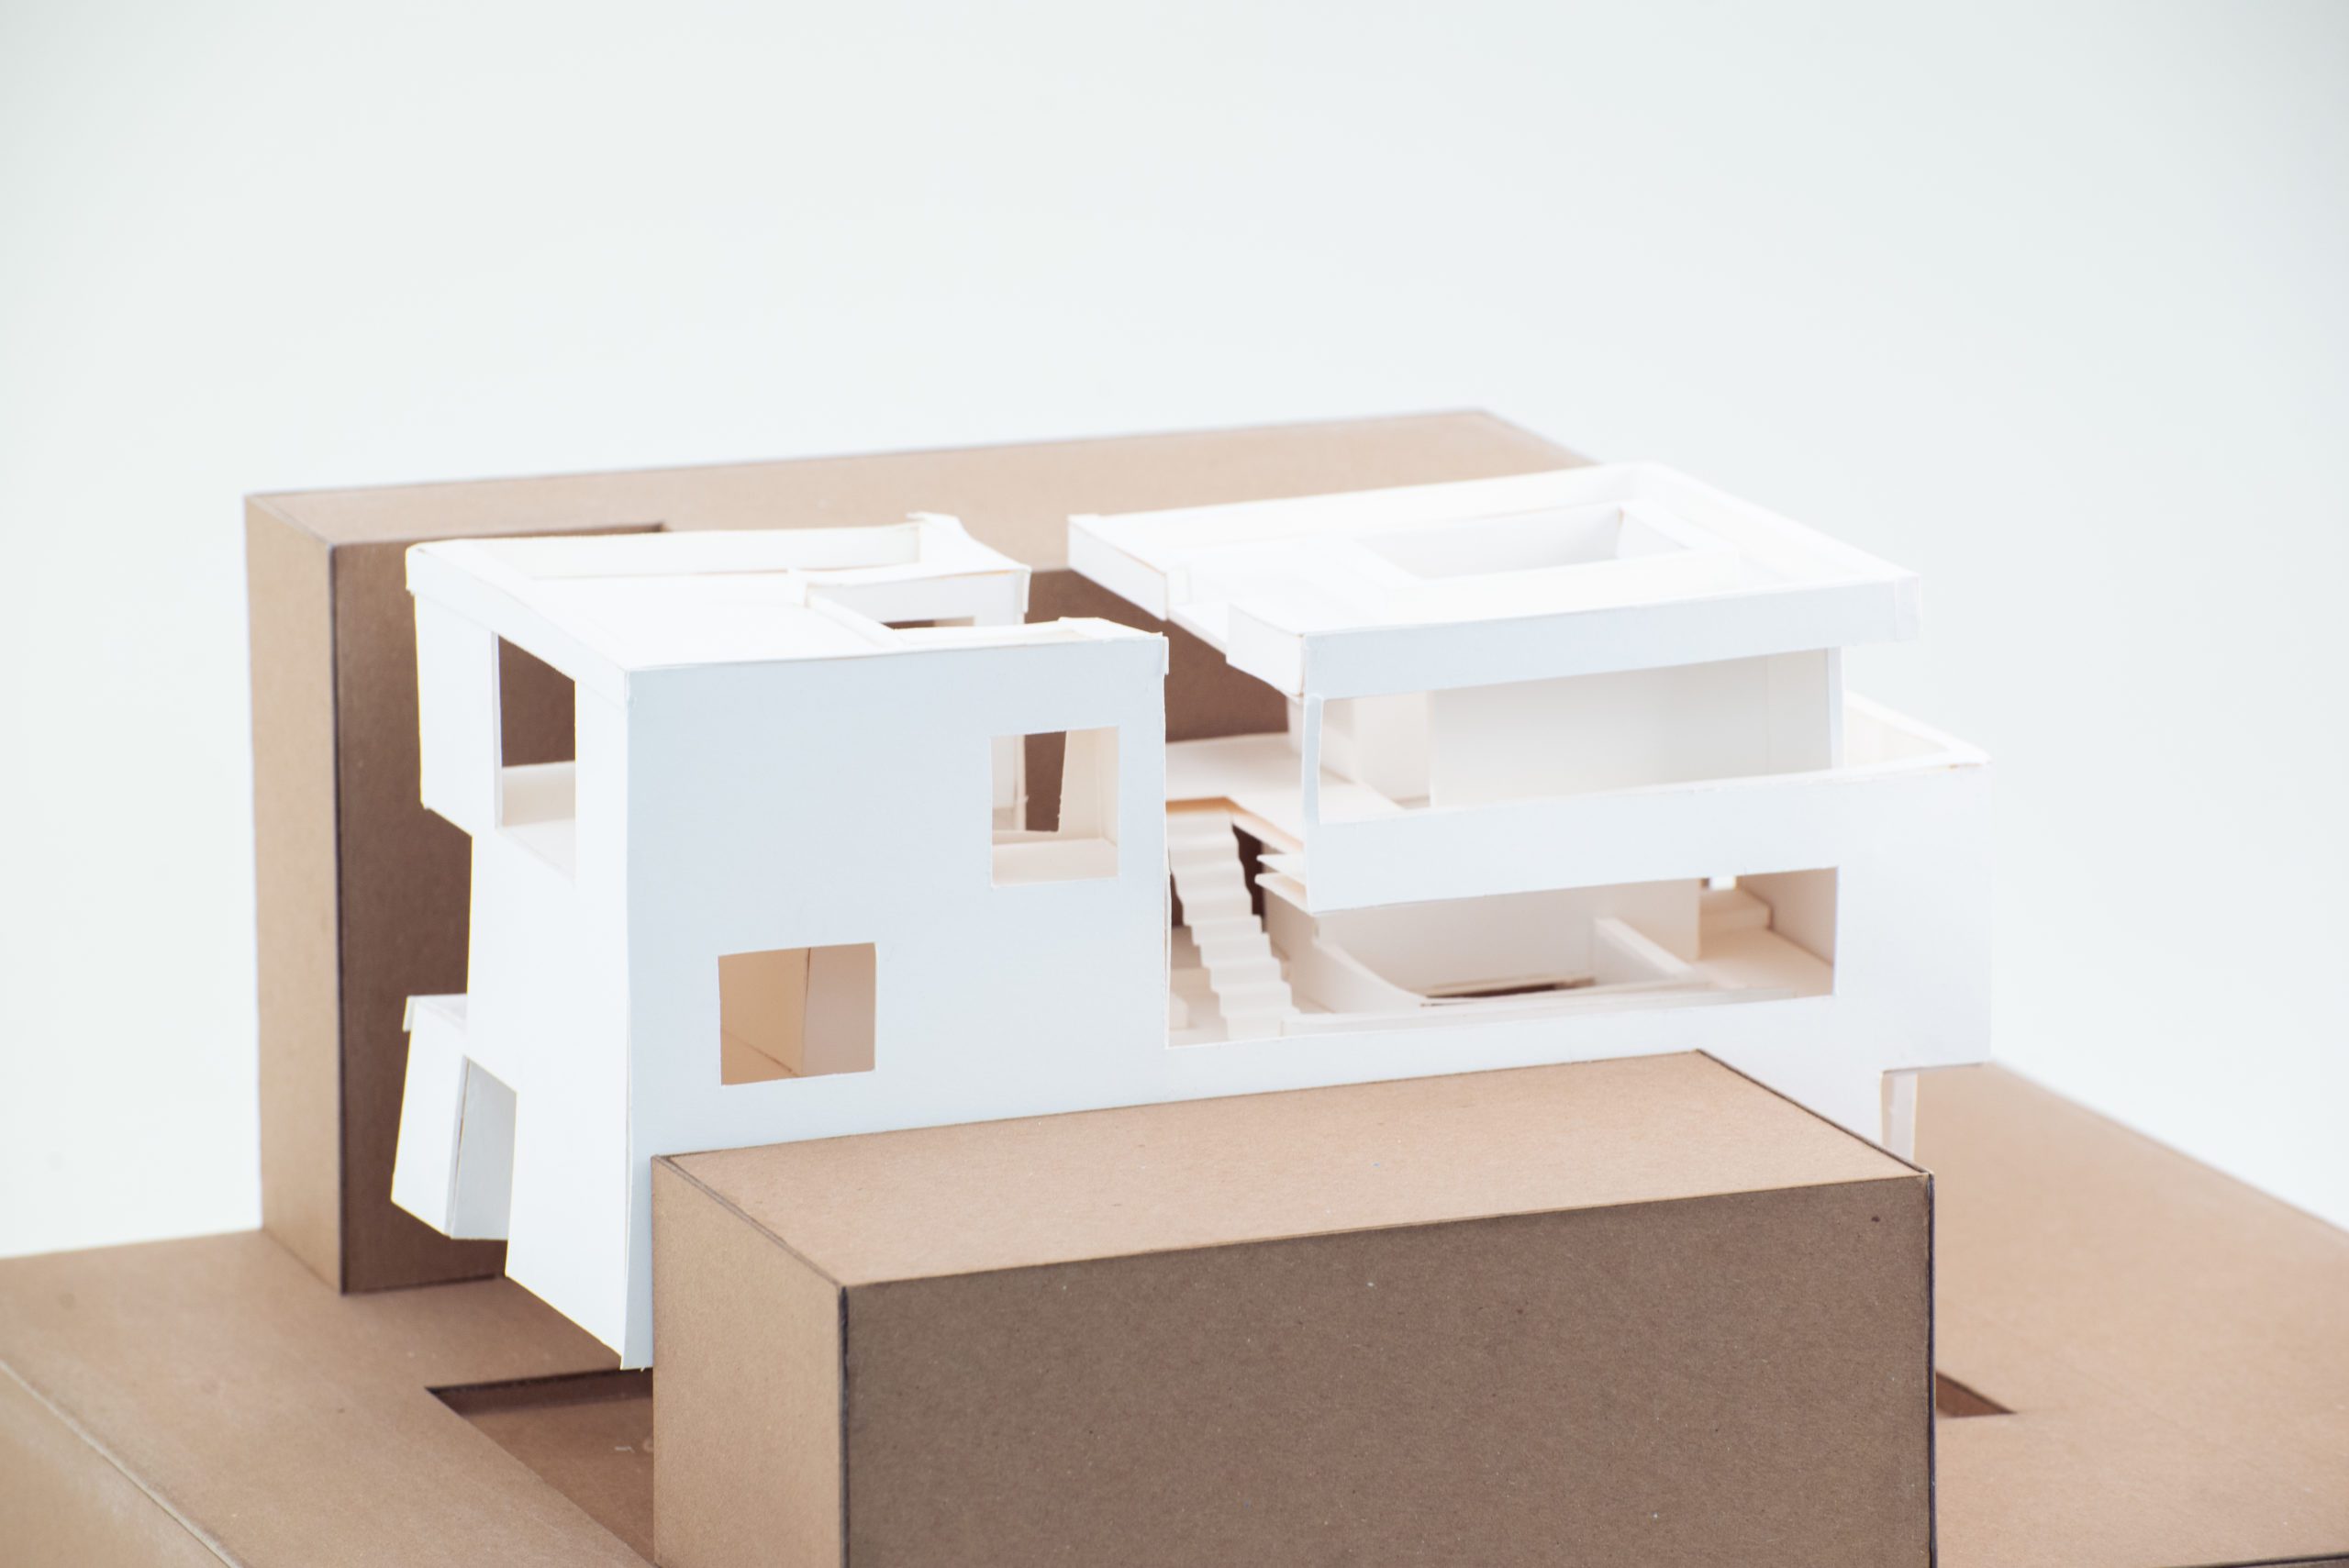 Exterior view of architecture model in-between cardboard boxes